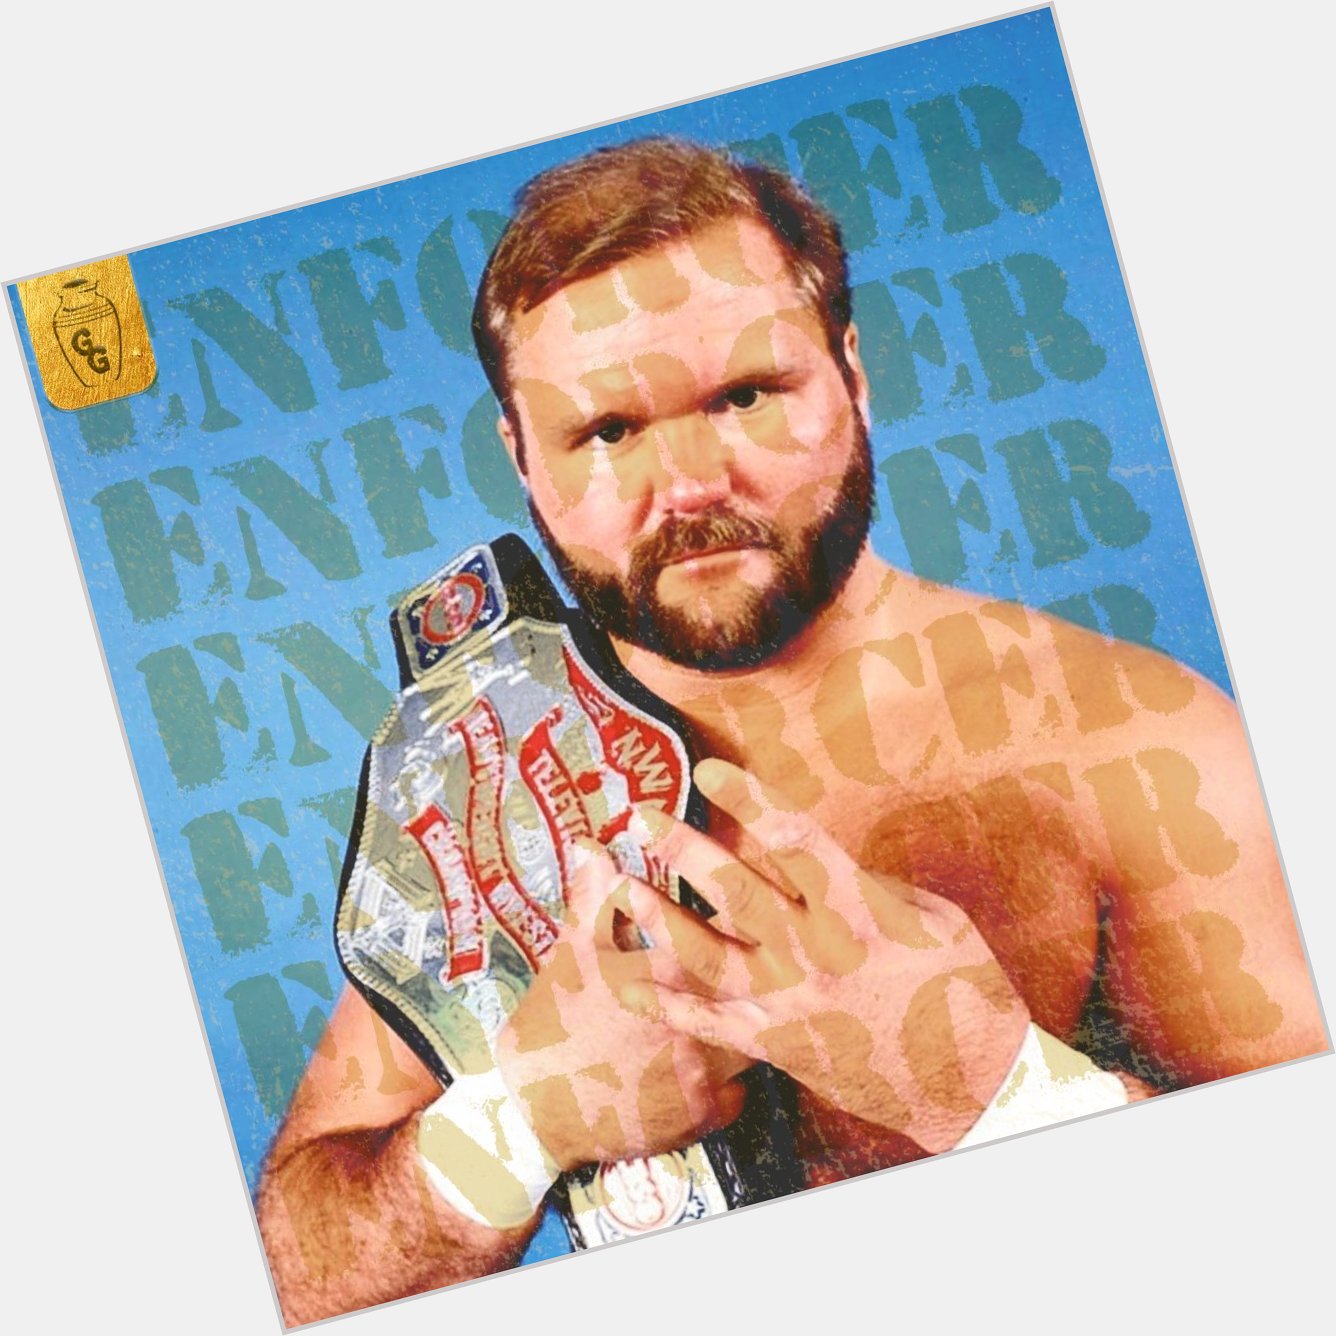 Happy Birthday to the one and only, Arn Anderson.  